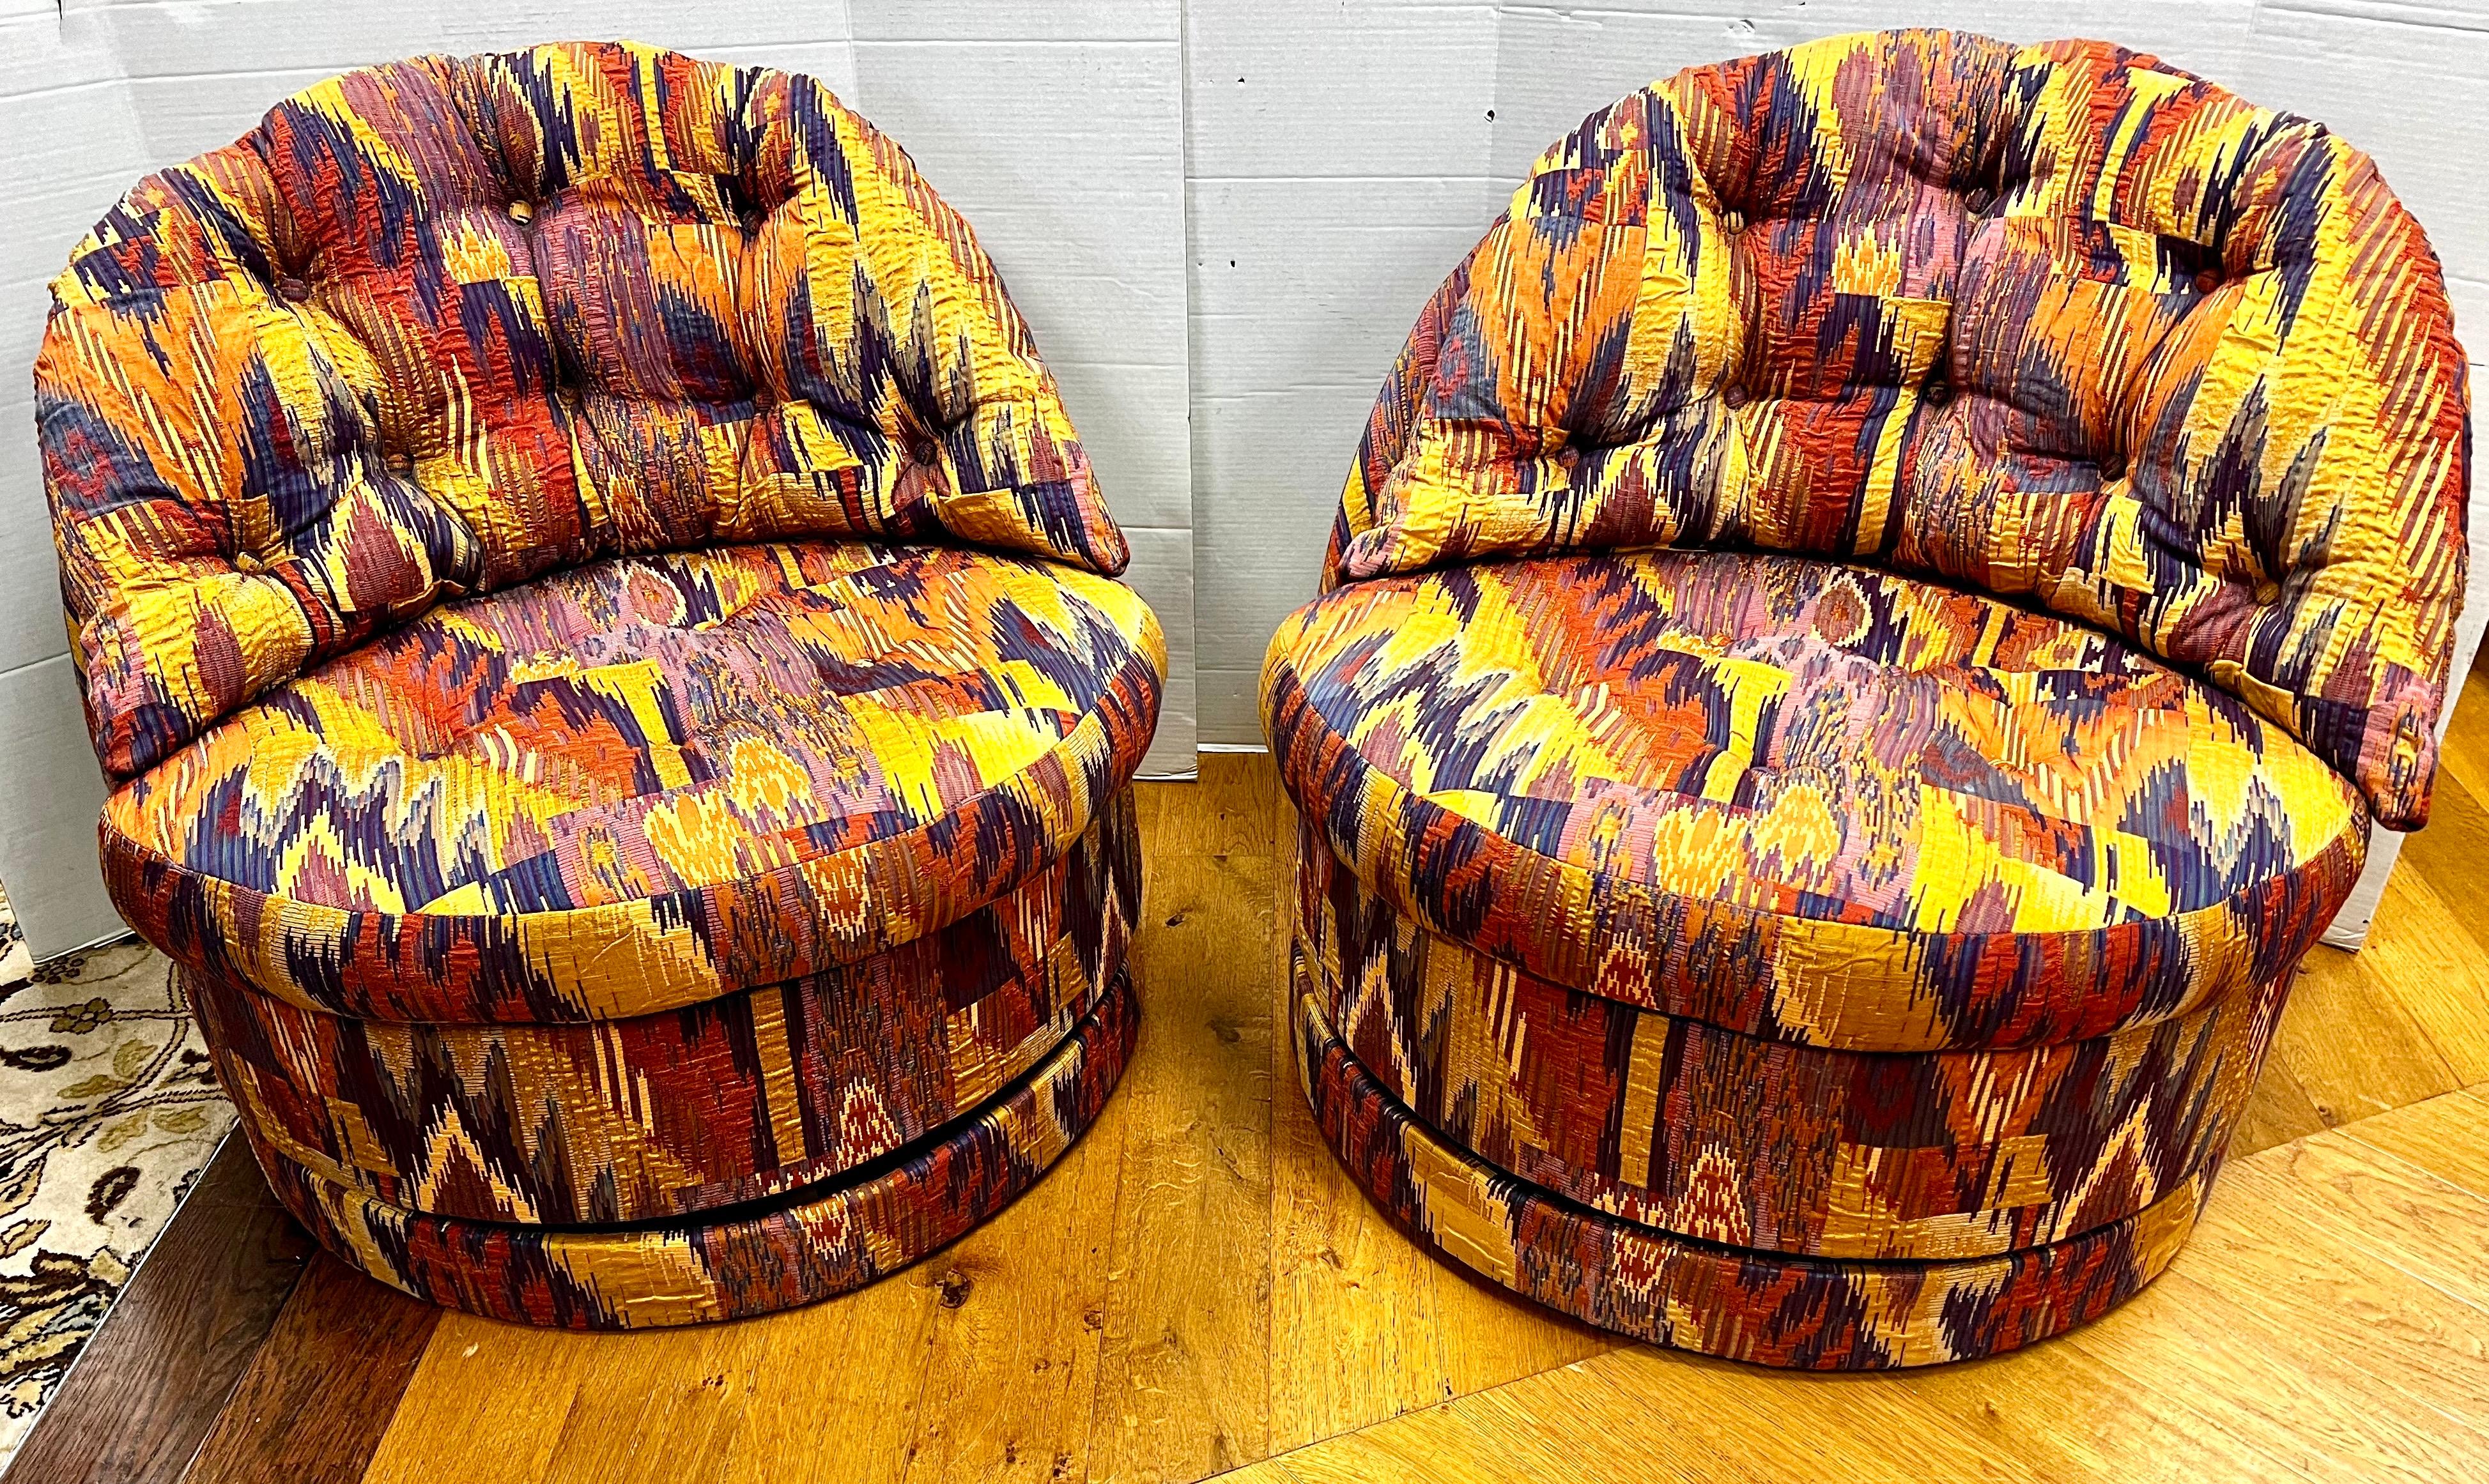 Rare pair of mid century barrel back swivel chairs with Jack Lenor Larsen upholstery from the 1970's.  Still n spectacular condition and the chevron fabric is next level!Seat and tufted back cushions are separate.  We are located in CT and may be